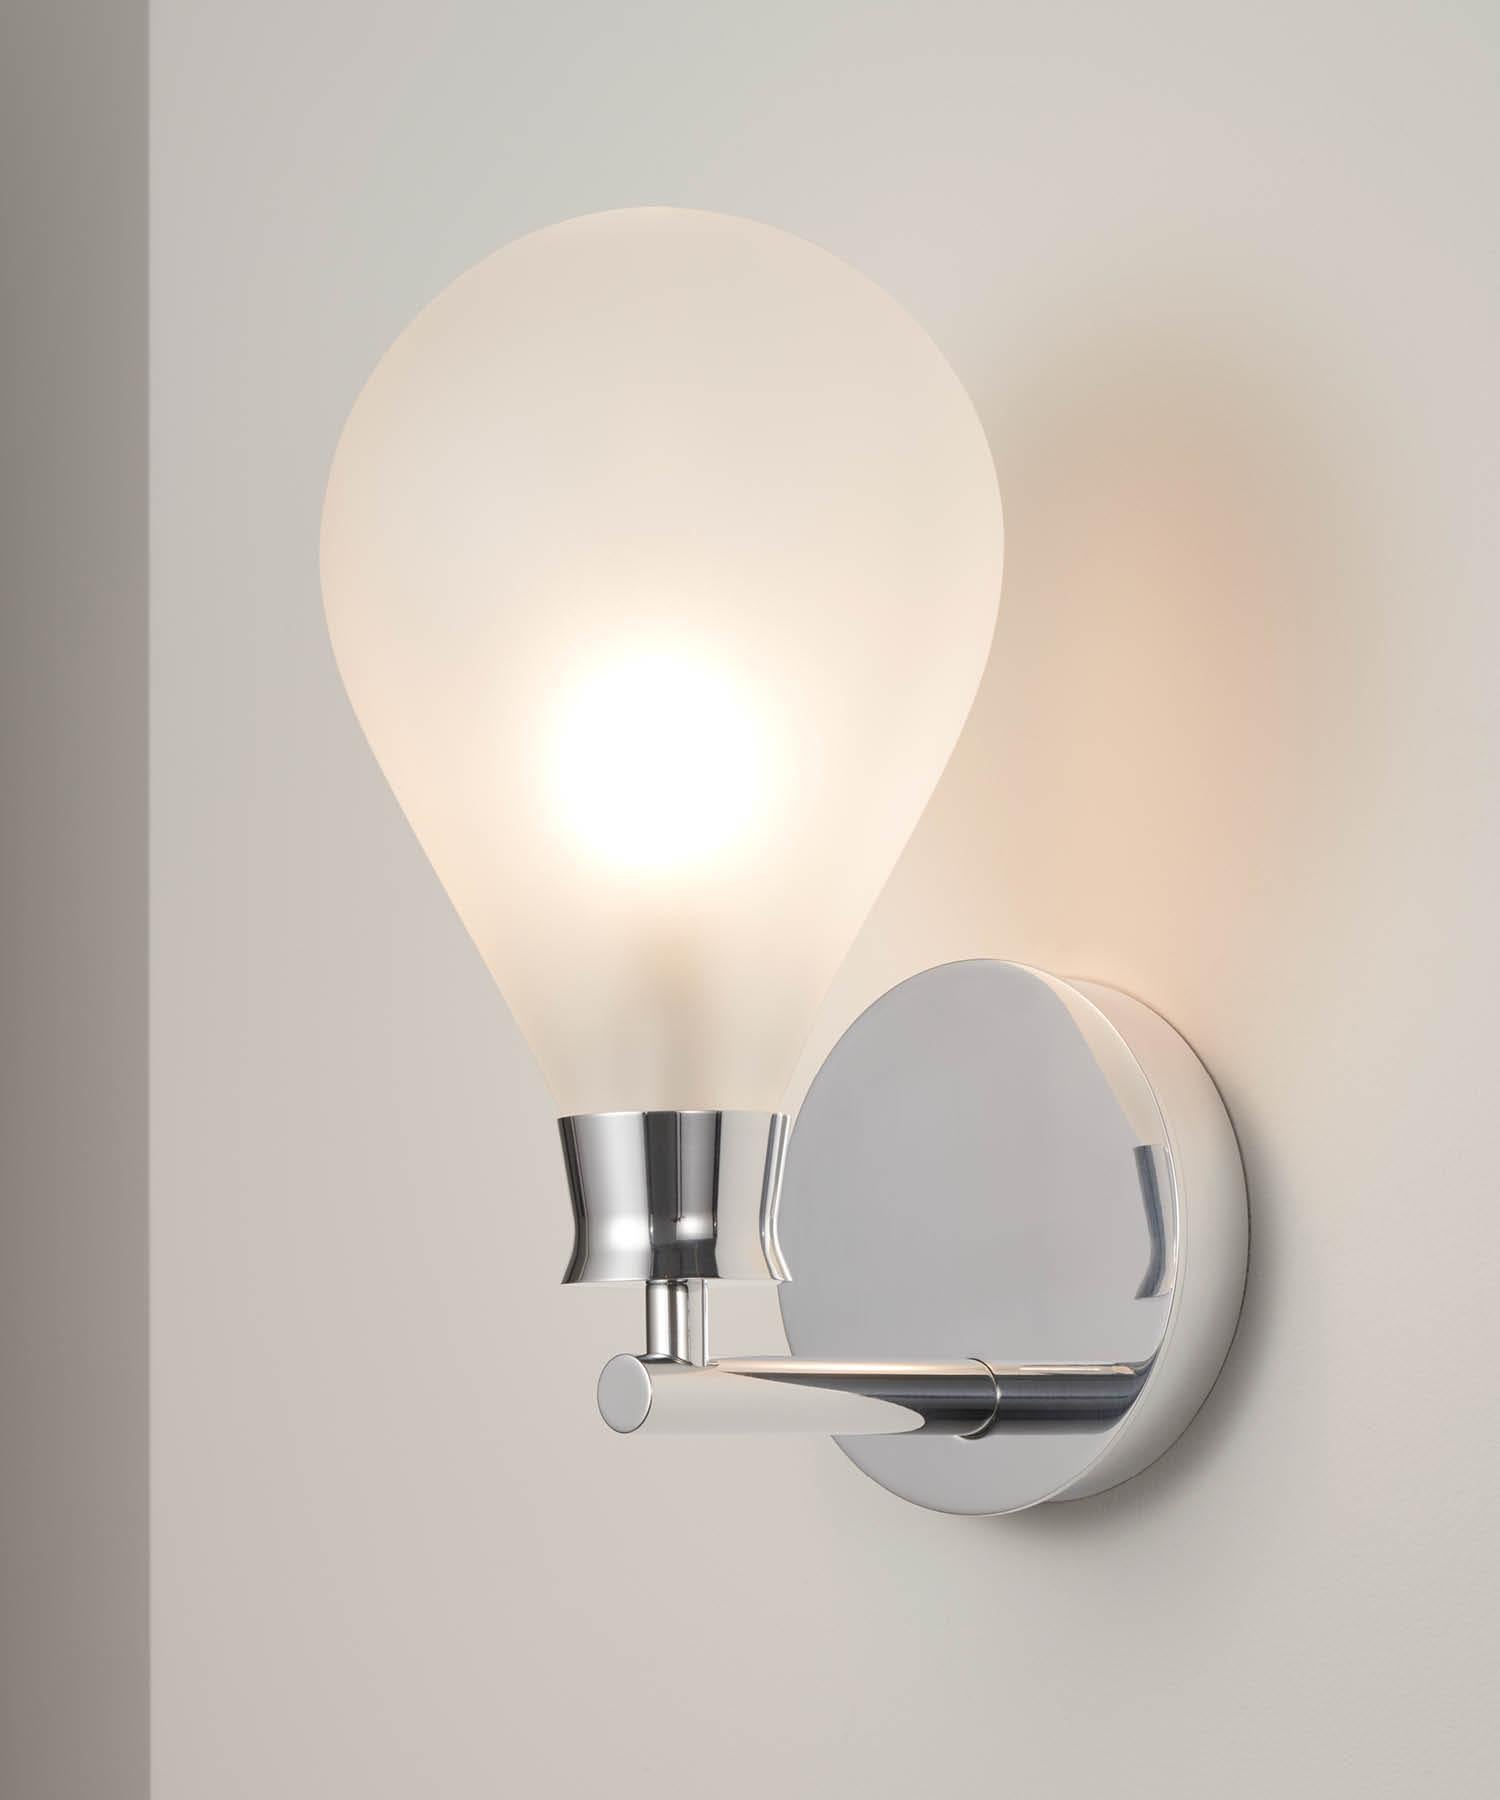 Anodized Cintola Wall Light in Polished Aluminium with Frosted Handblown Glass Globe For Sale